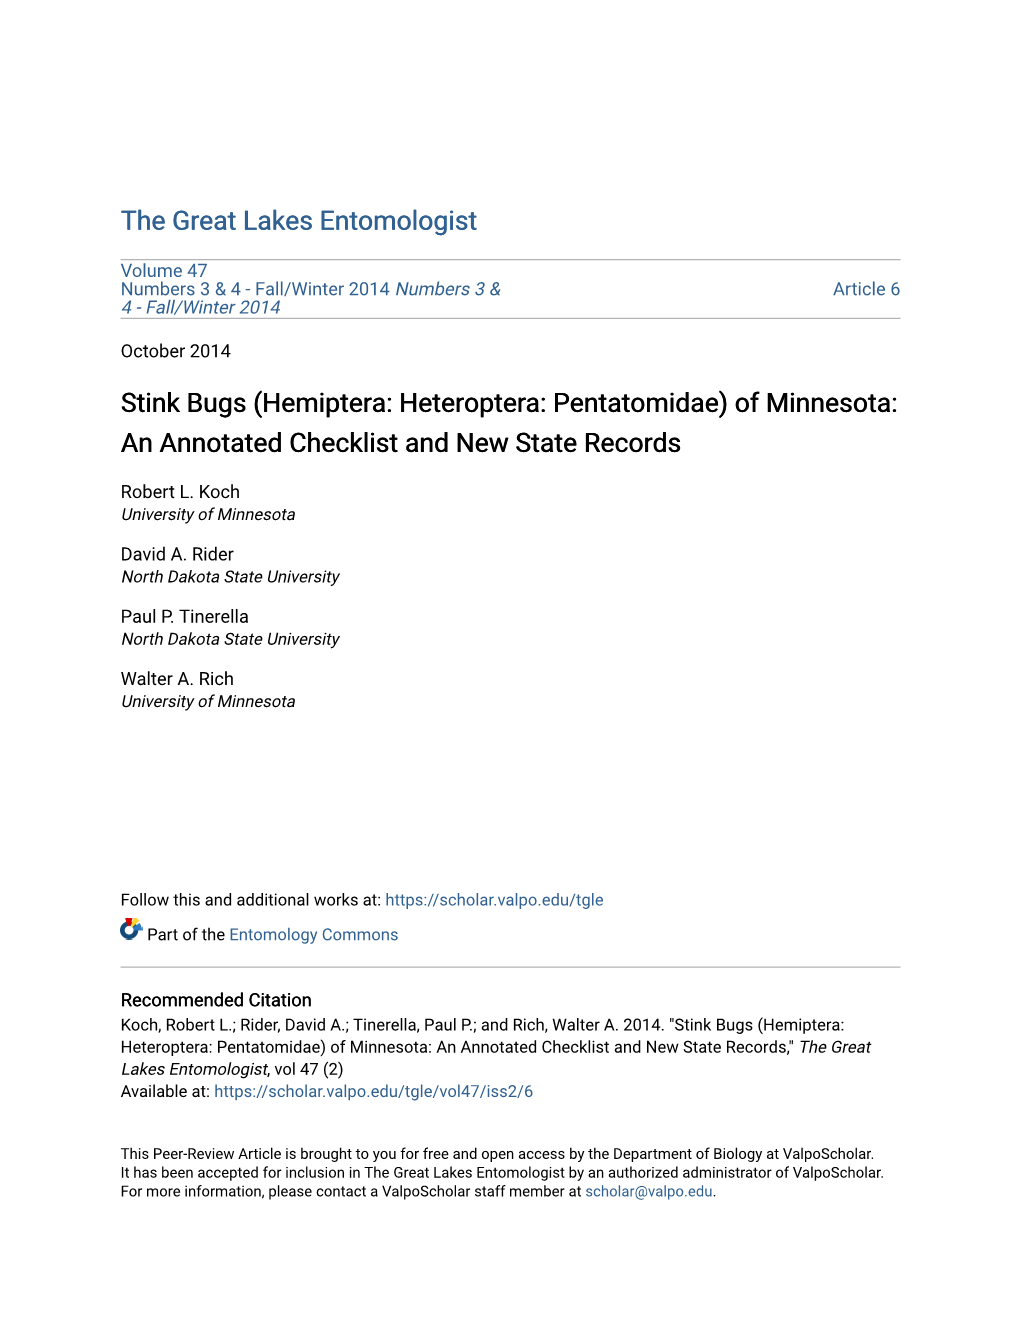 Stink Bugs (Hemiptera: Heteroptera: Pentatomidae) of Minnesota: an Annotated Checklist and New State Records